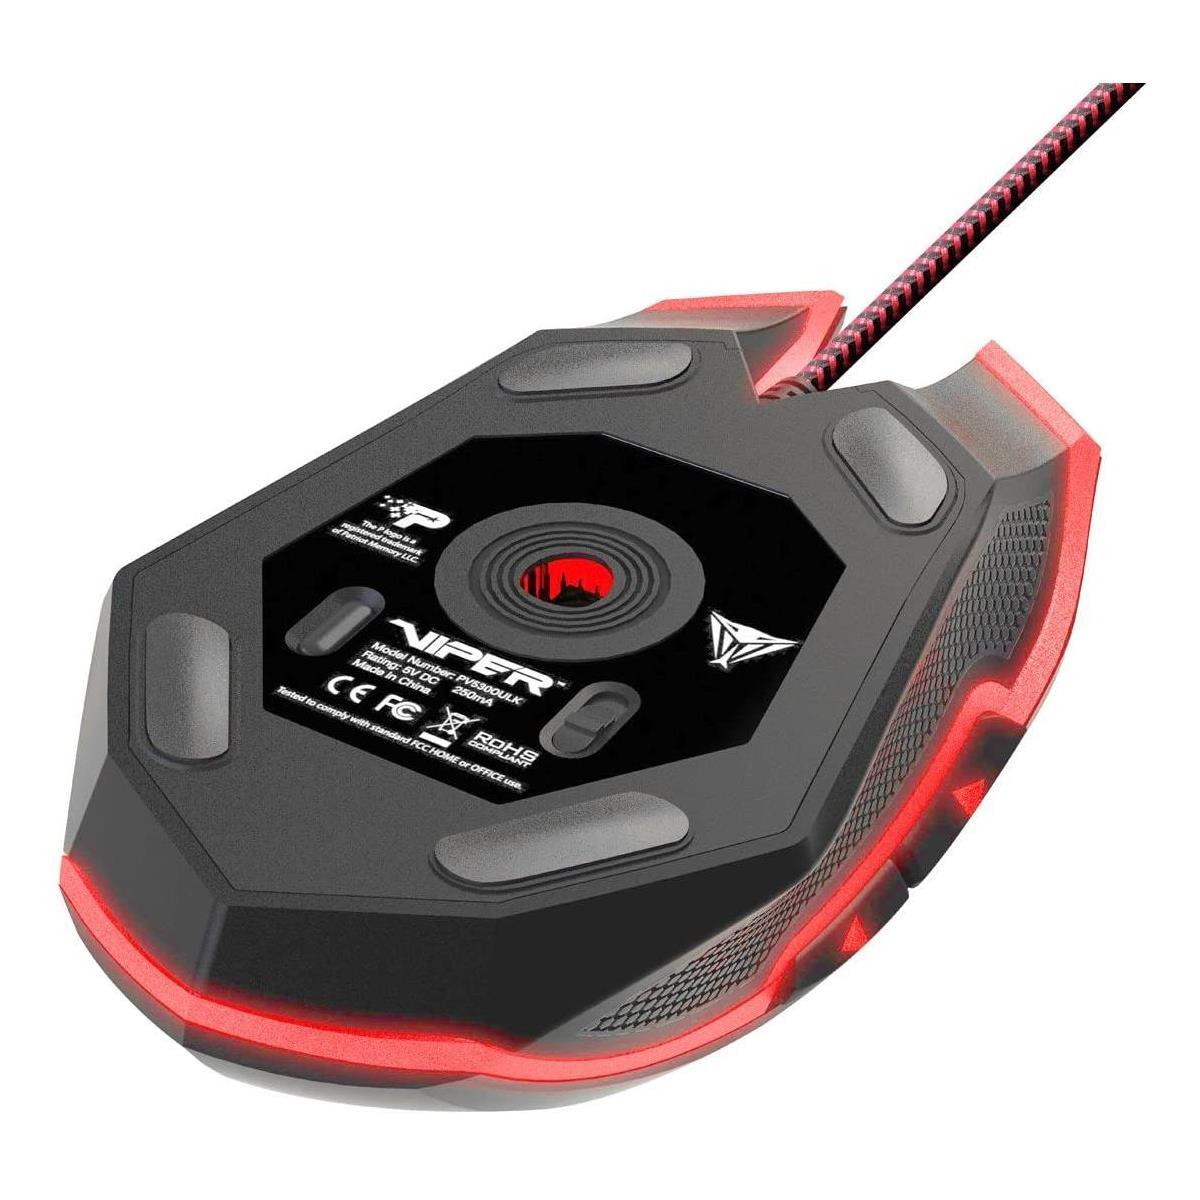 Patriot Viper V530 Optical Gaming Mouse - Wired